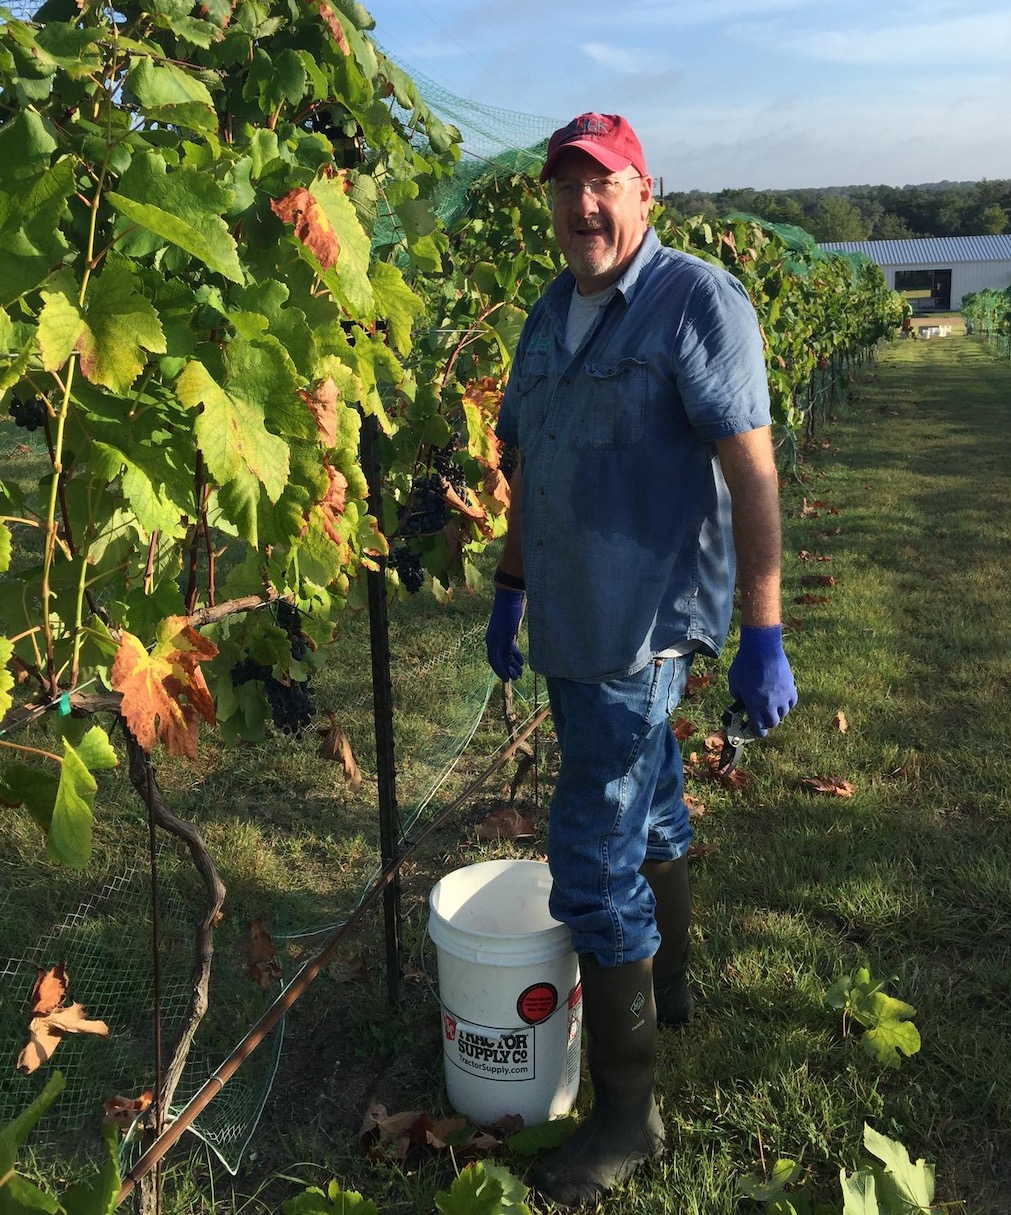 CFO Randy Majek is standing beside grape vines with a white bucket on the ground.